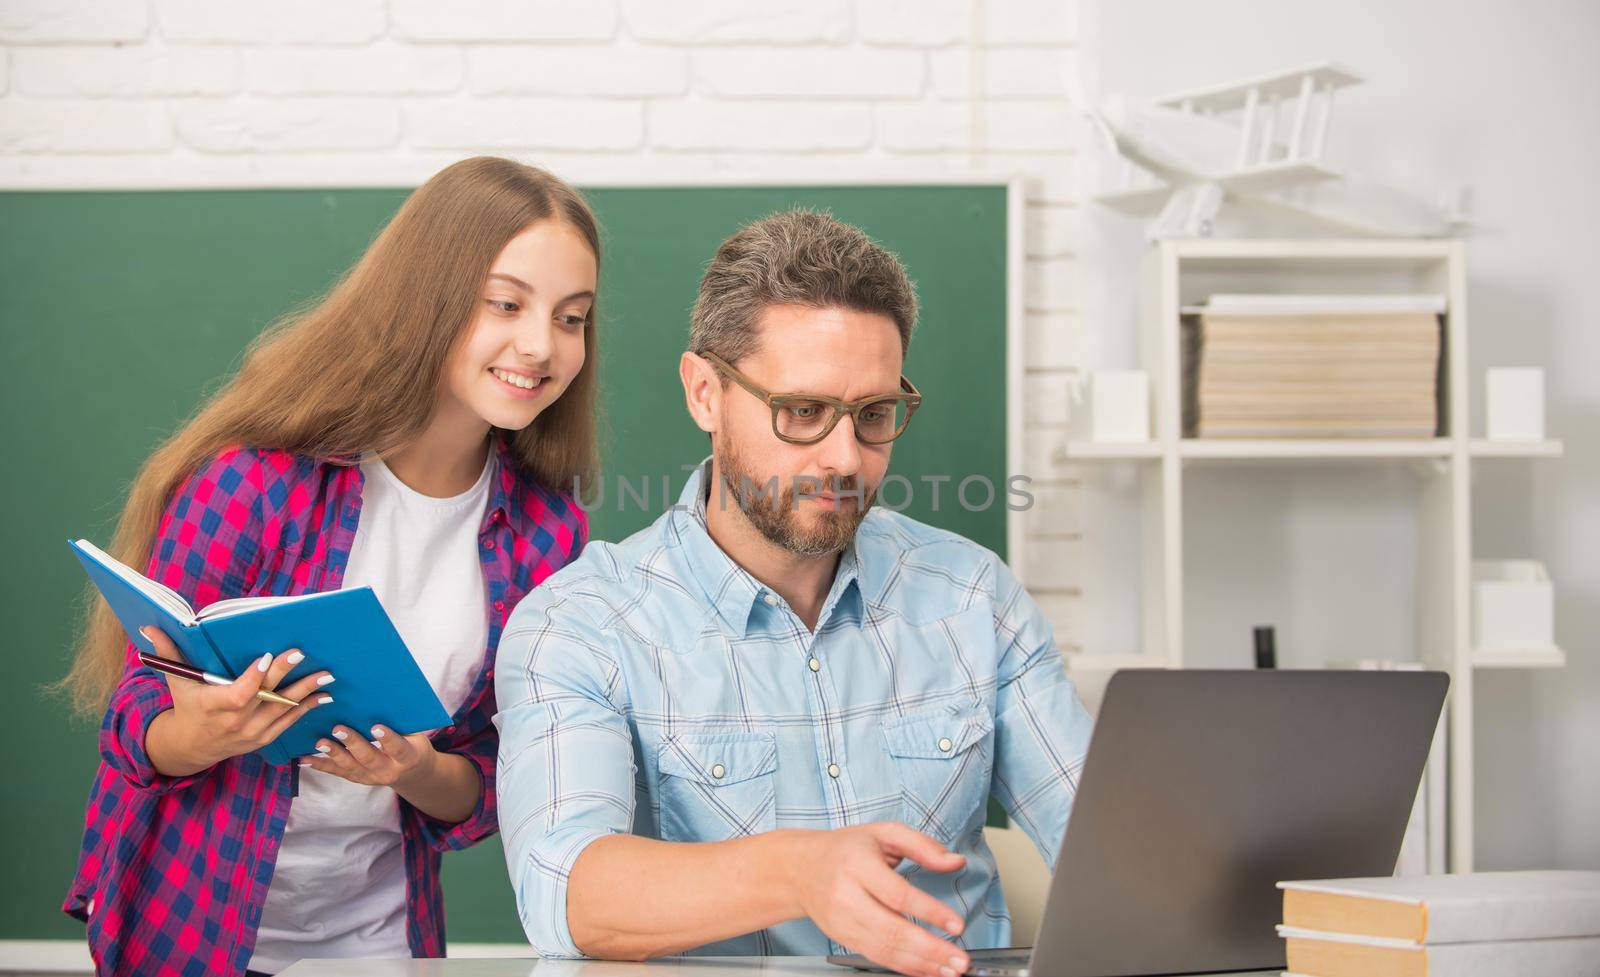 busy father and child study at school with book and laptop on blackboard background, parenthood by RedFoxStudio